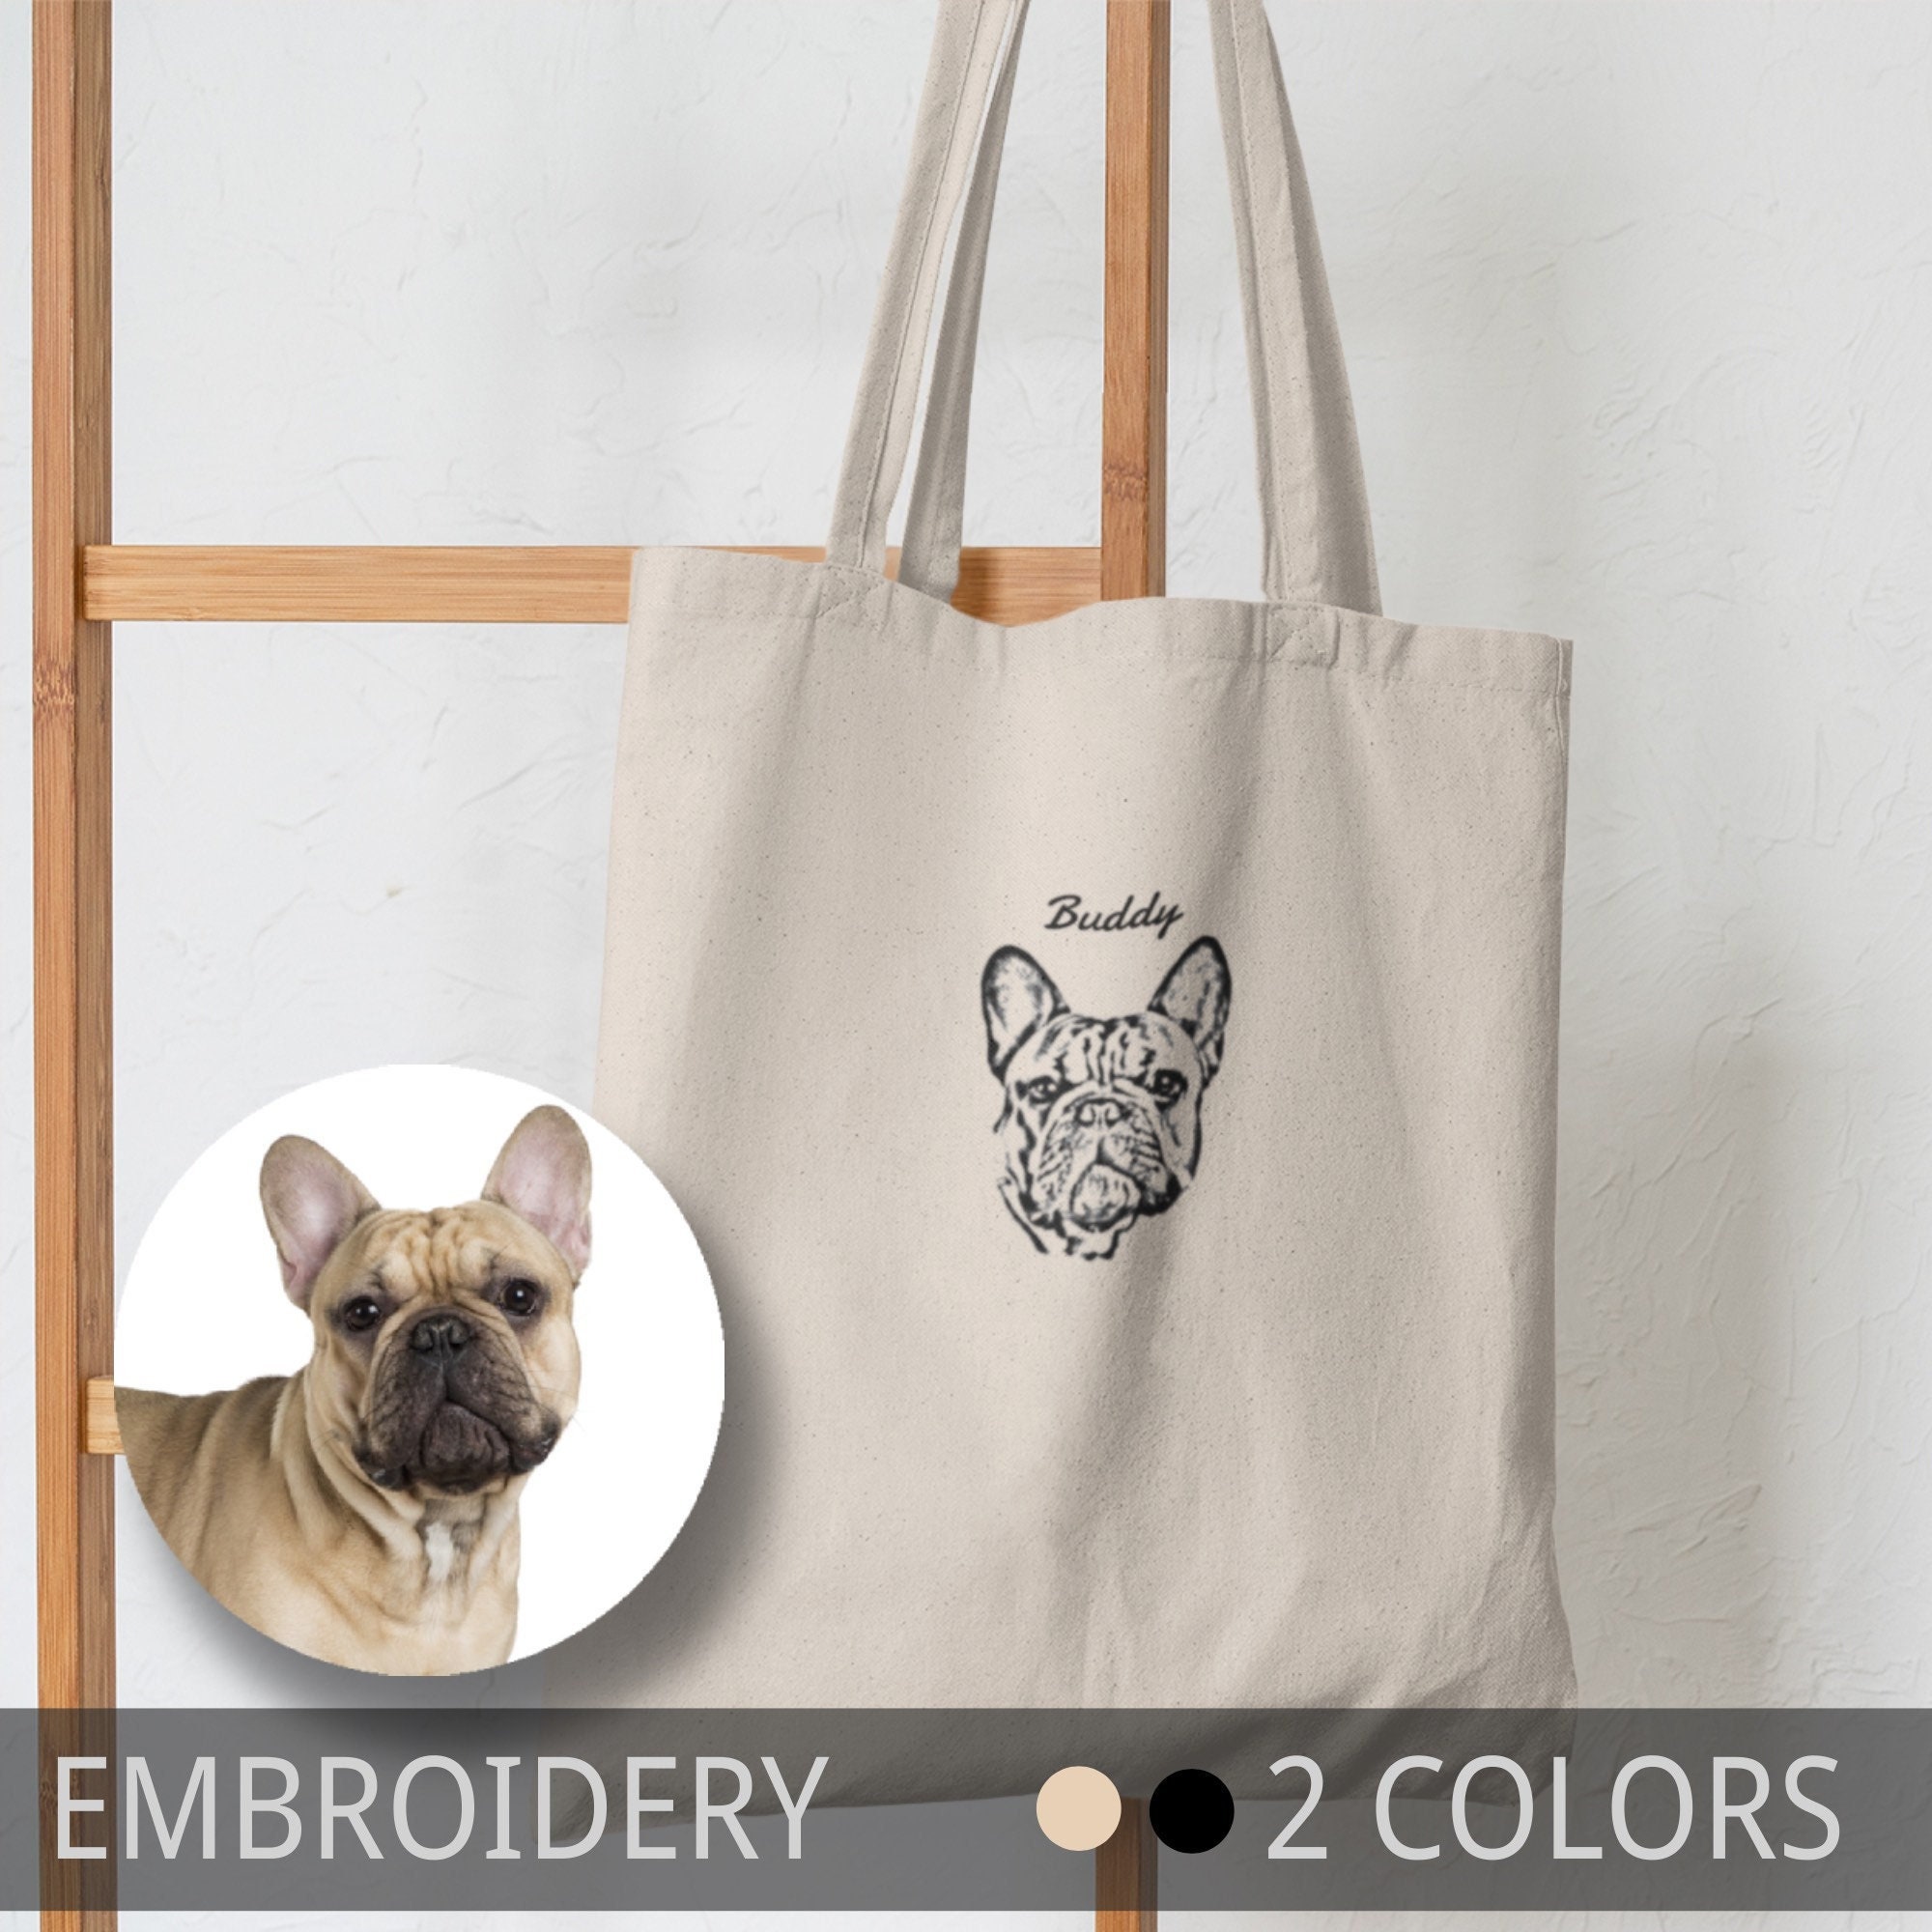 Dog mum tote bag with a dog name/Christmas gift/Paw prints tote bag/Dog lover birthday gift/Gift for her/Gift for pet lovers 